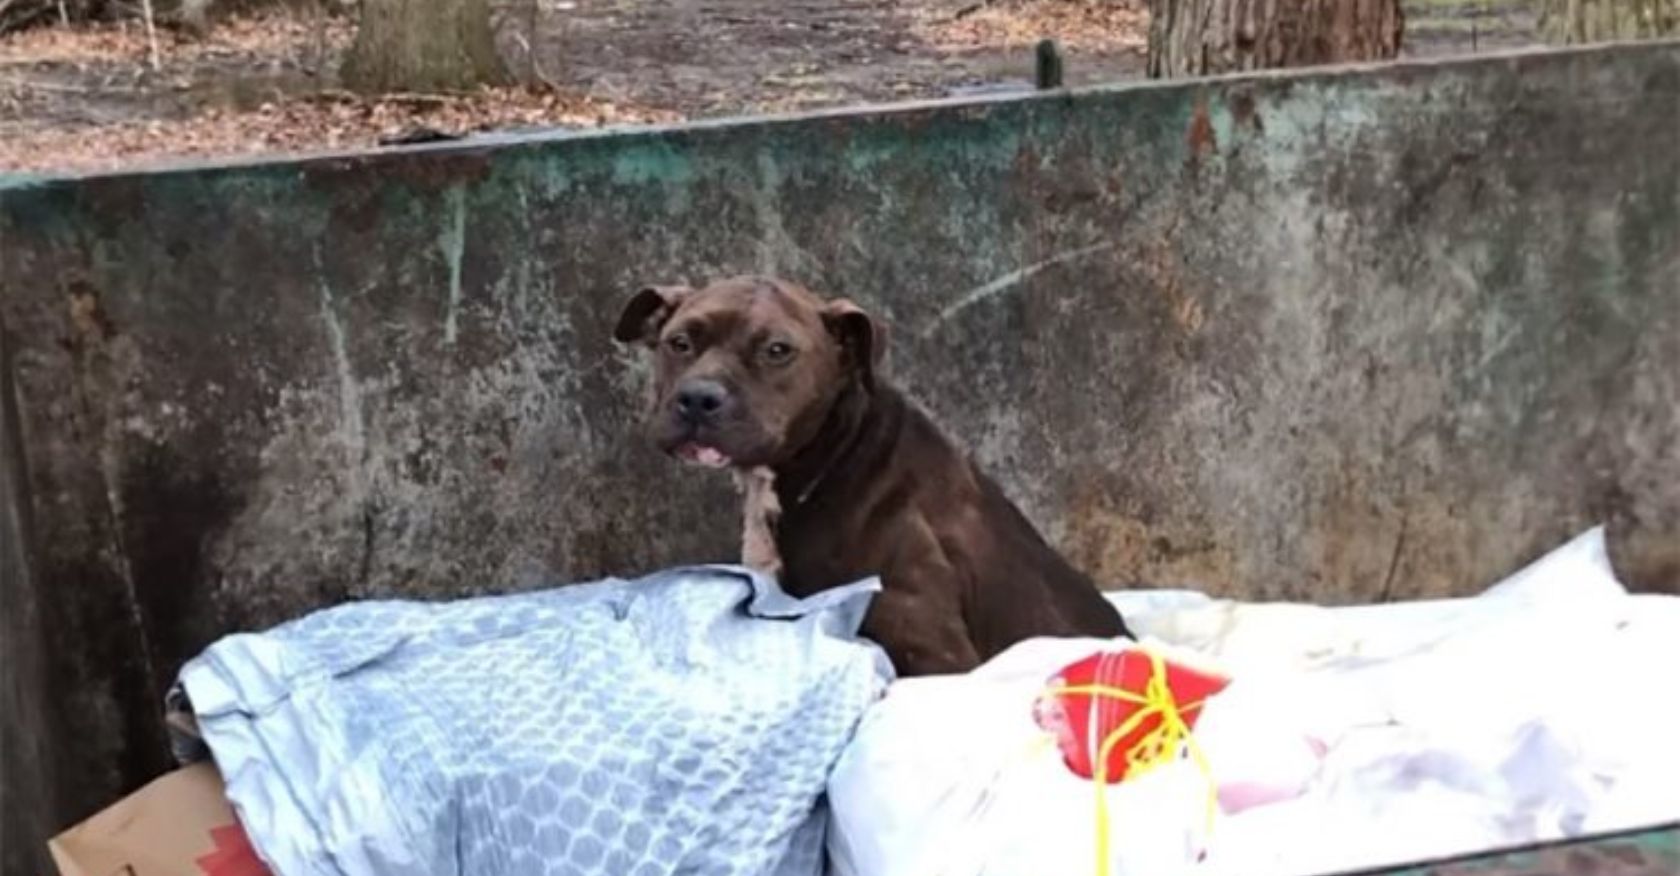 A pitbull dog, callously thrown in the trash, pleads for help. Its eyes reflect a profound desperation for a second chance.